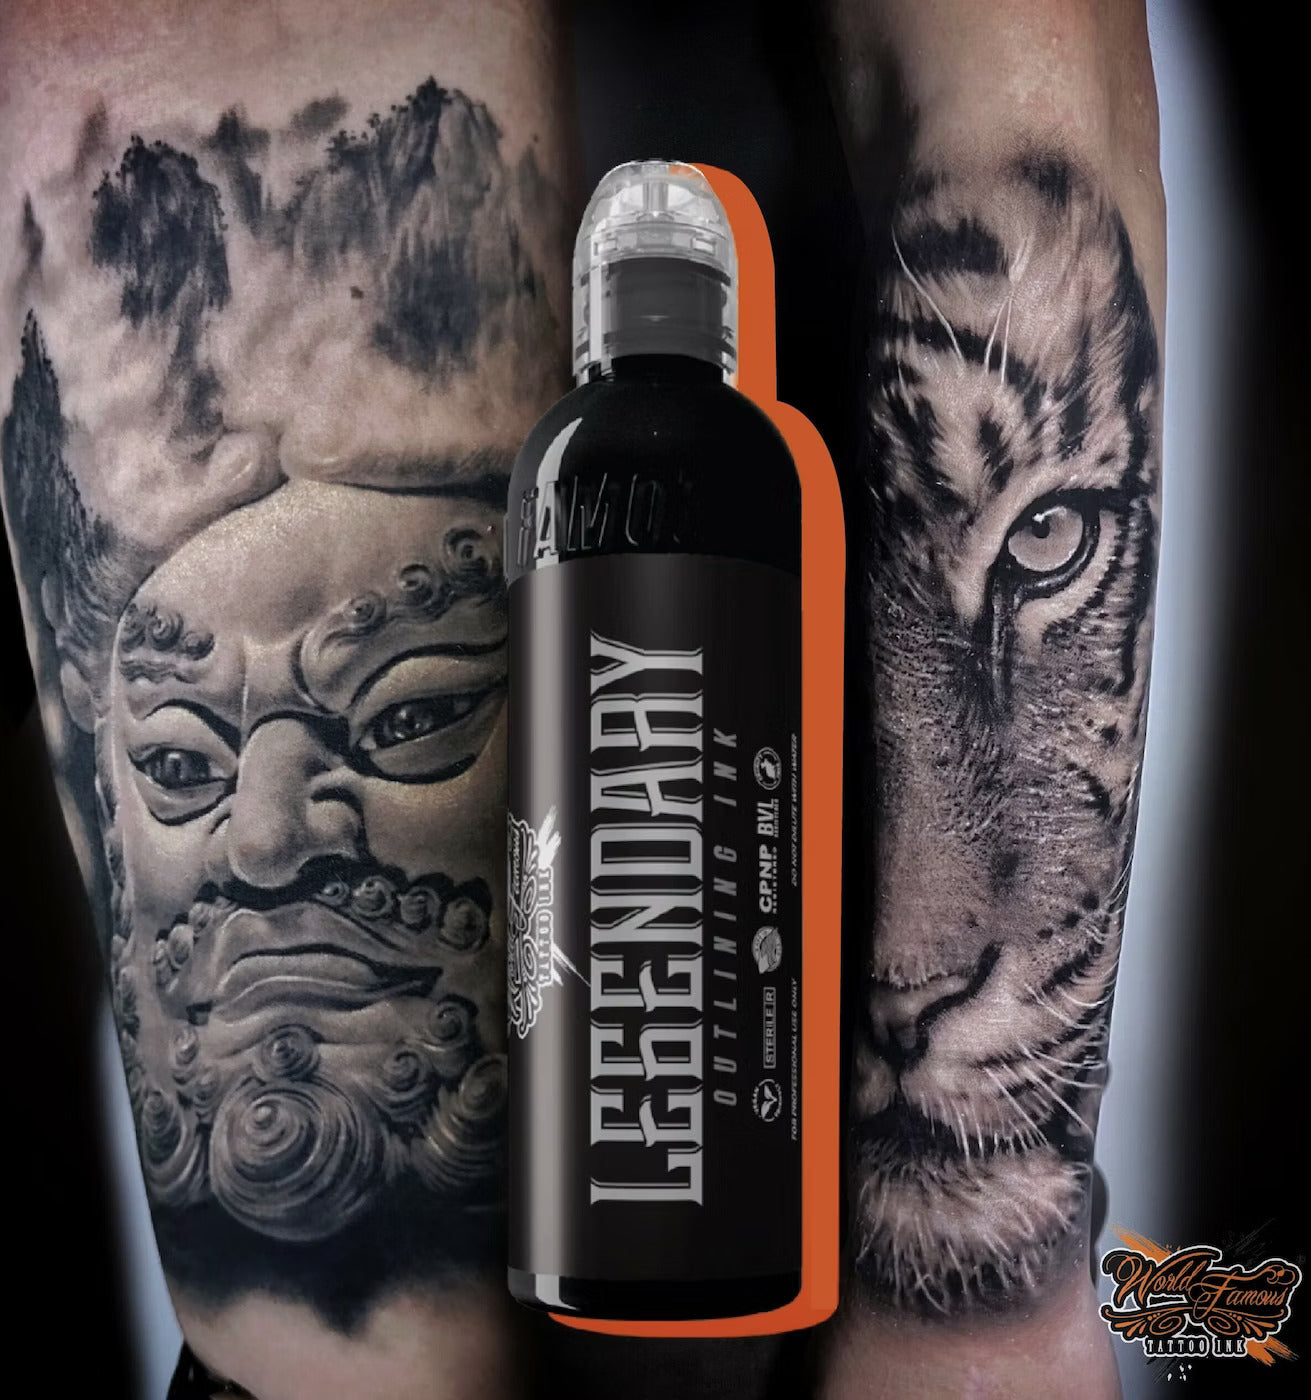 All Black Inks – World Famous Tattoo Ink